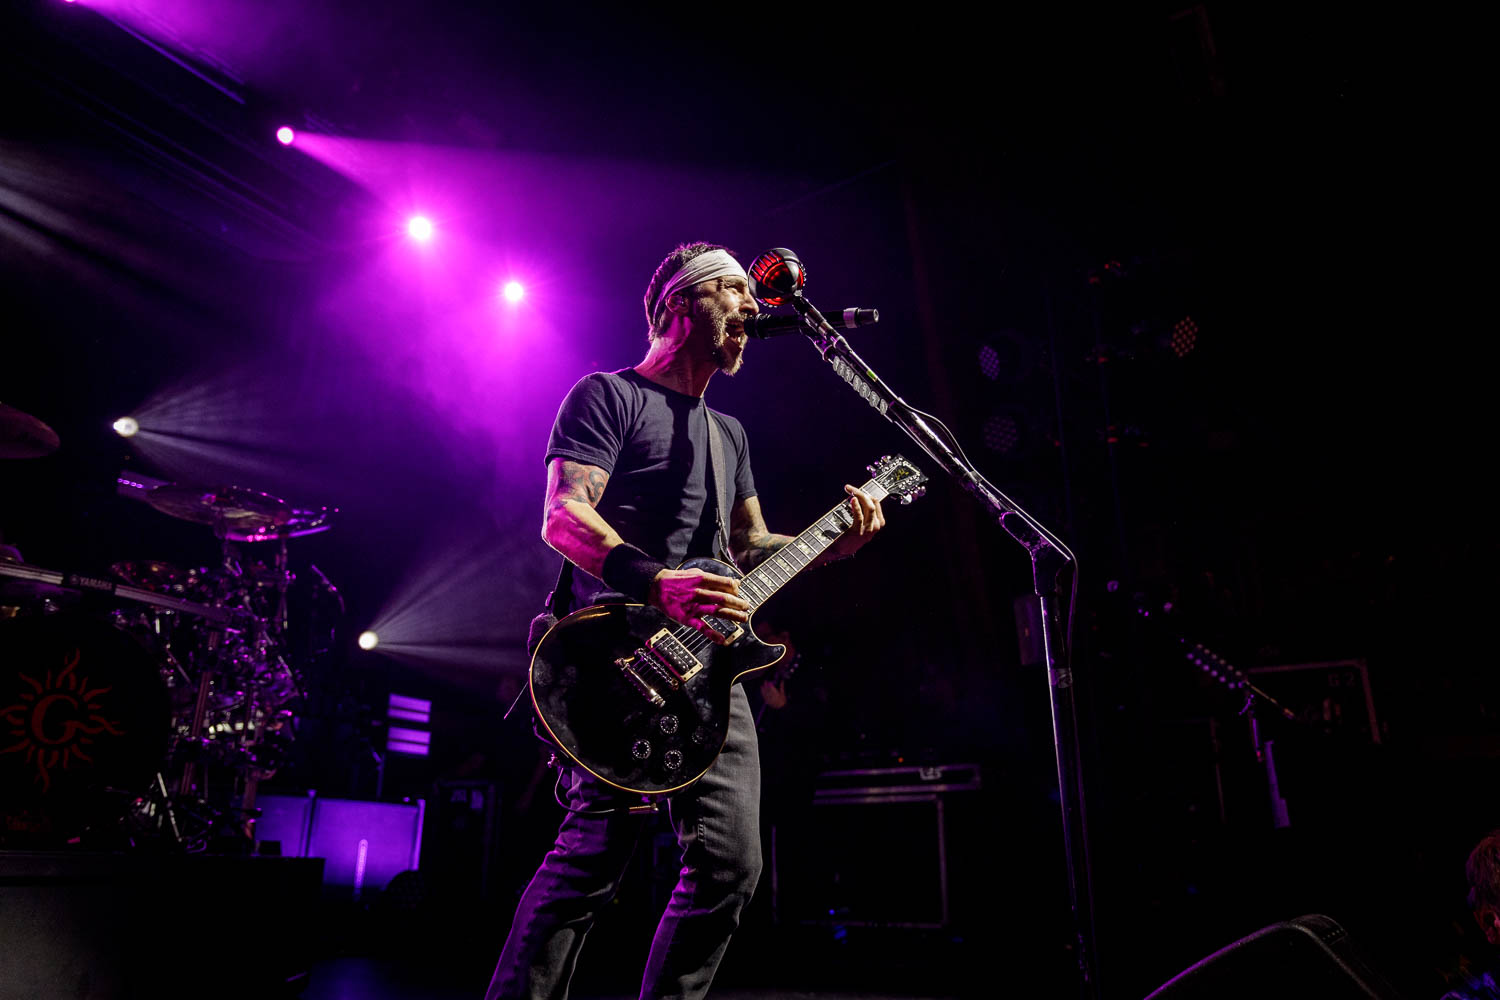 Godsmack at O2 Ritz in Manchester on February 28th 2019